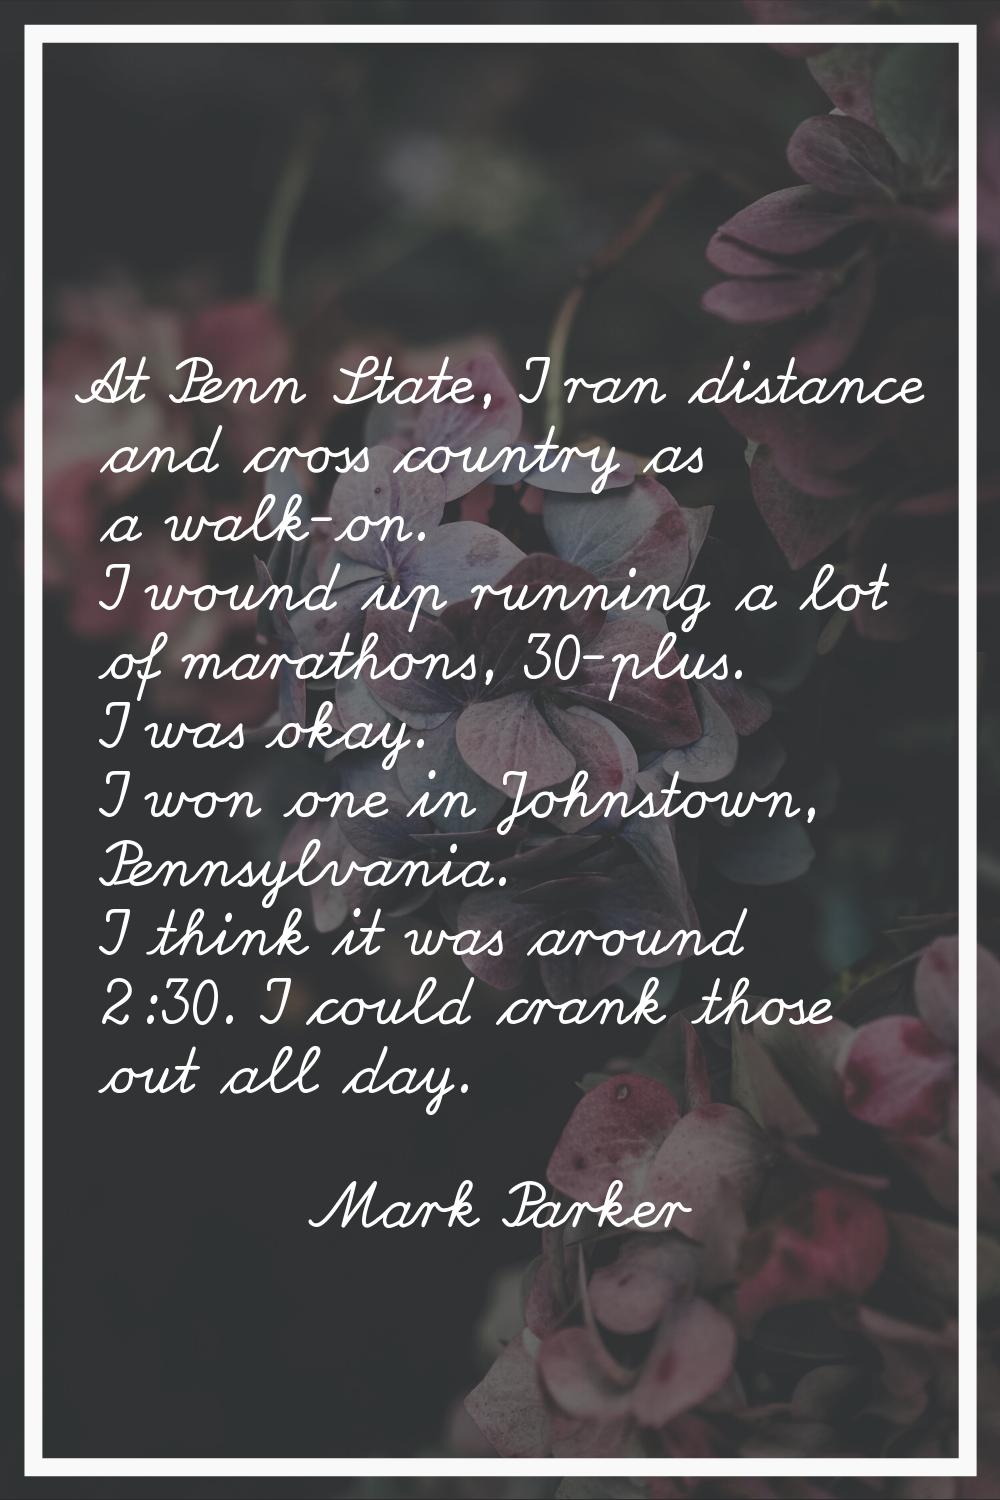 At Penn State, I ran distance and cross country as a walk-on. I wound up running a lot of marathons